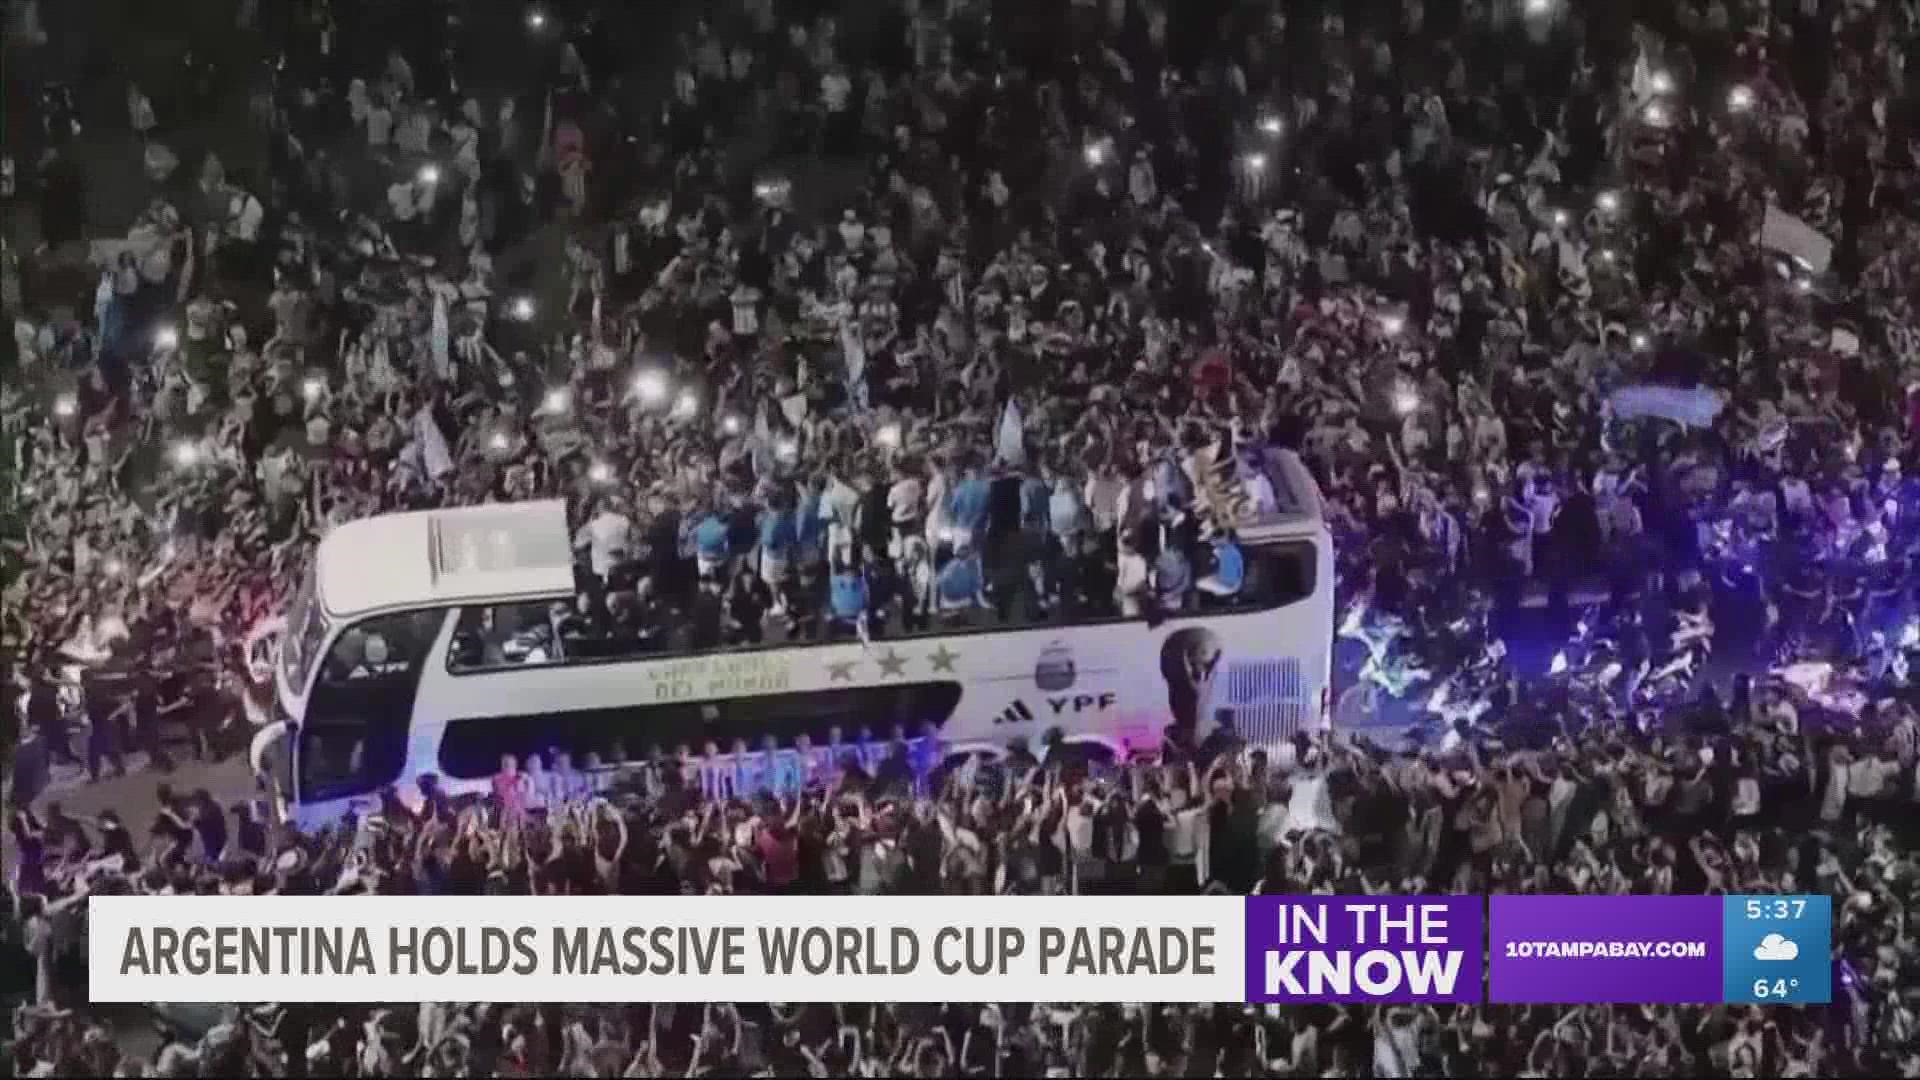 So many fans swarmed the capital that the players had to abandon the open-air bus transporting them to Buenos Aires and get on helicopters instead.